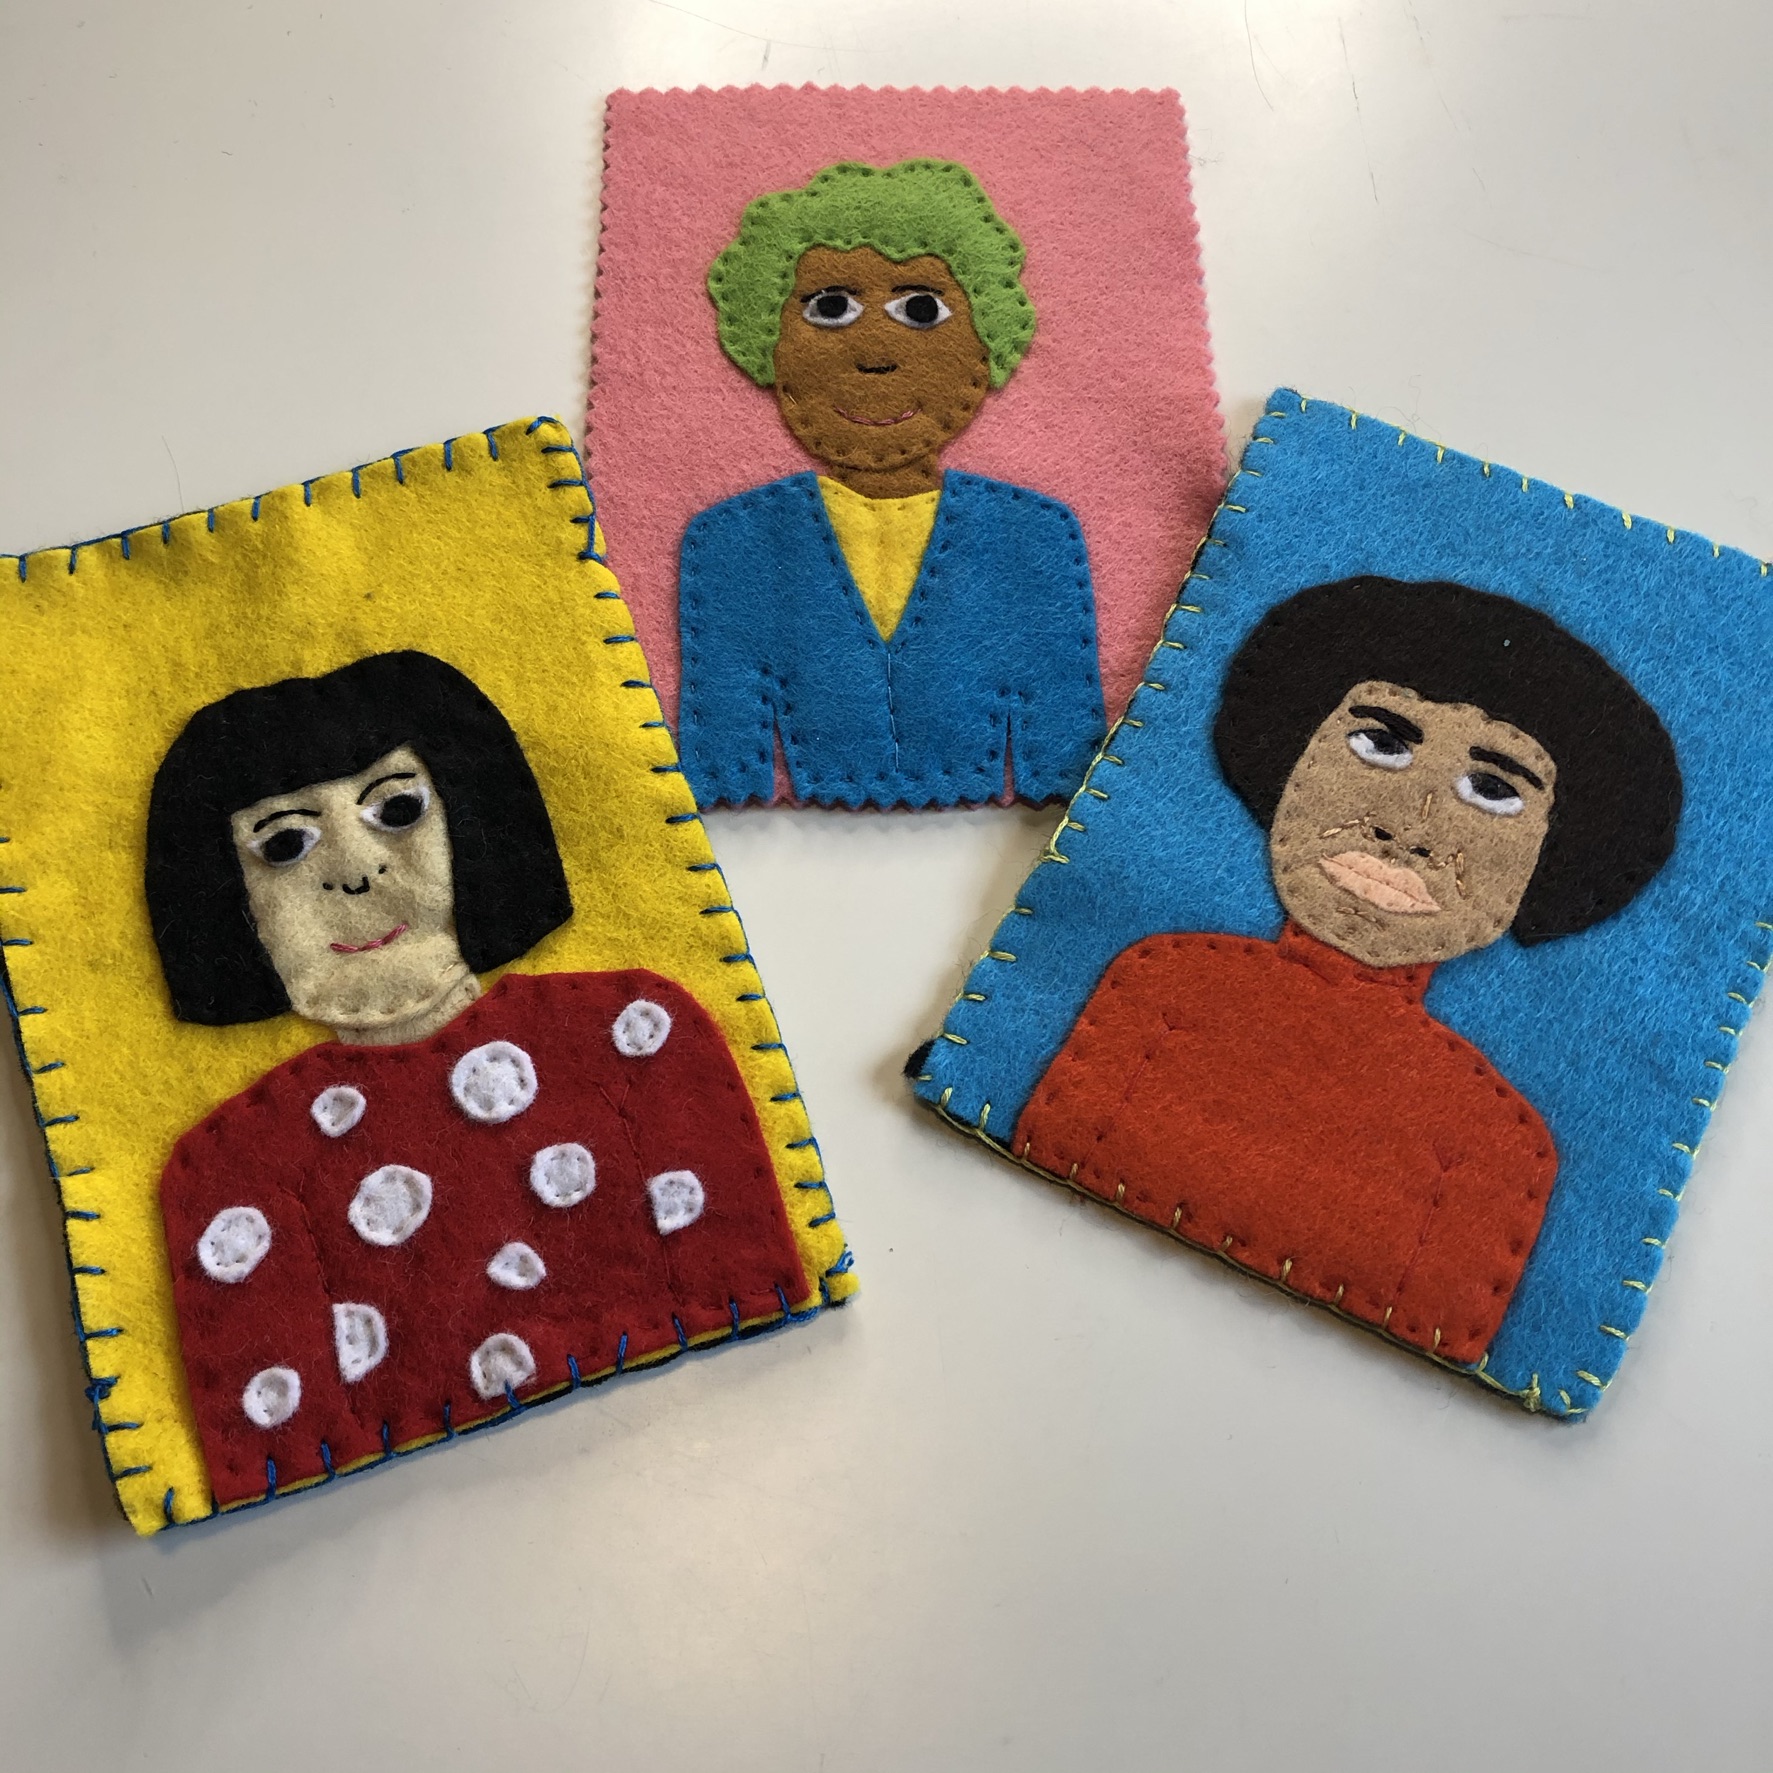 Three felt portraits in bright colours show a mix of people with different skin tones. The portraits are placed on a white table.